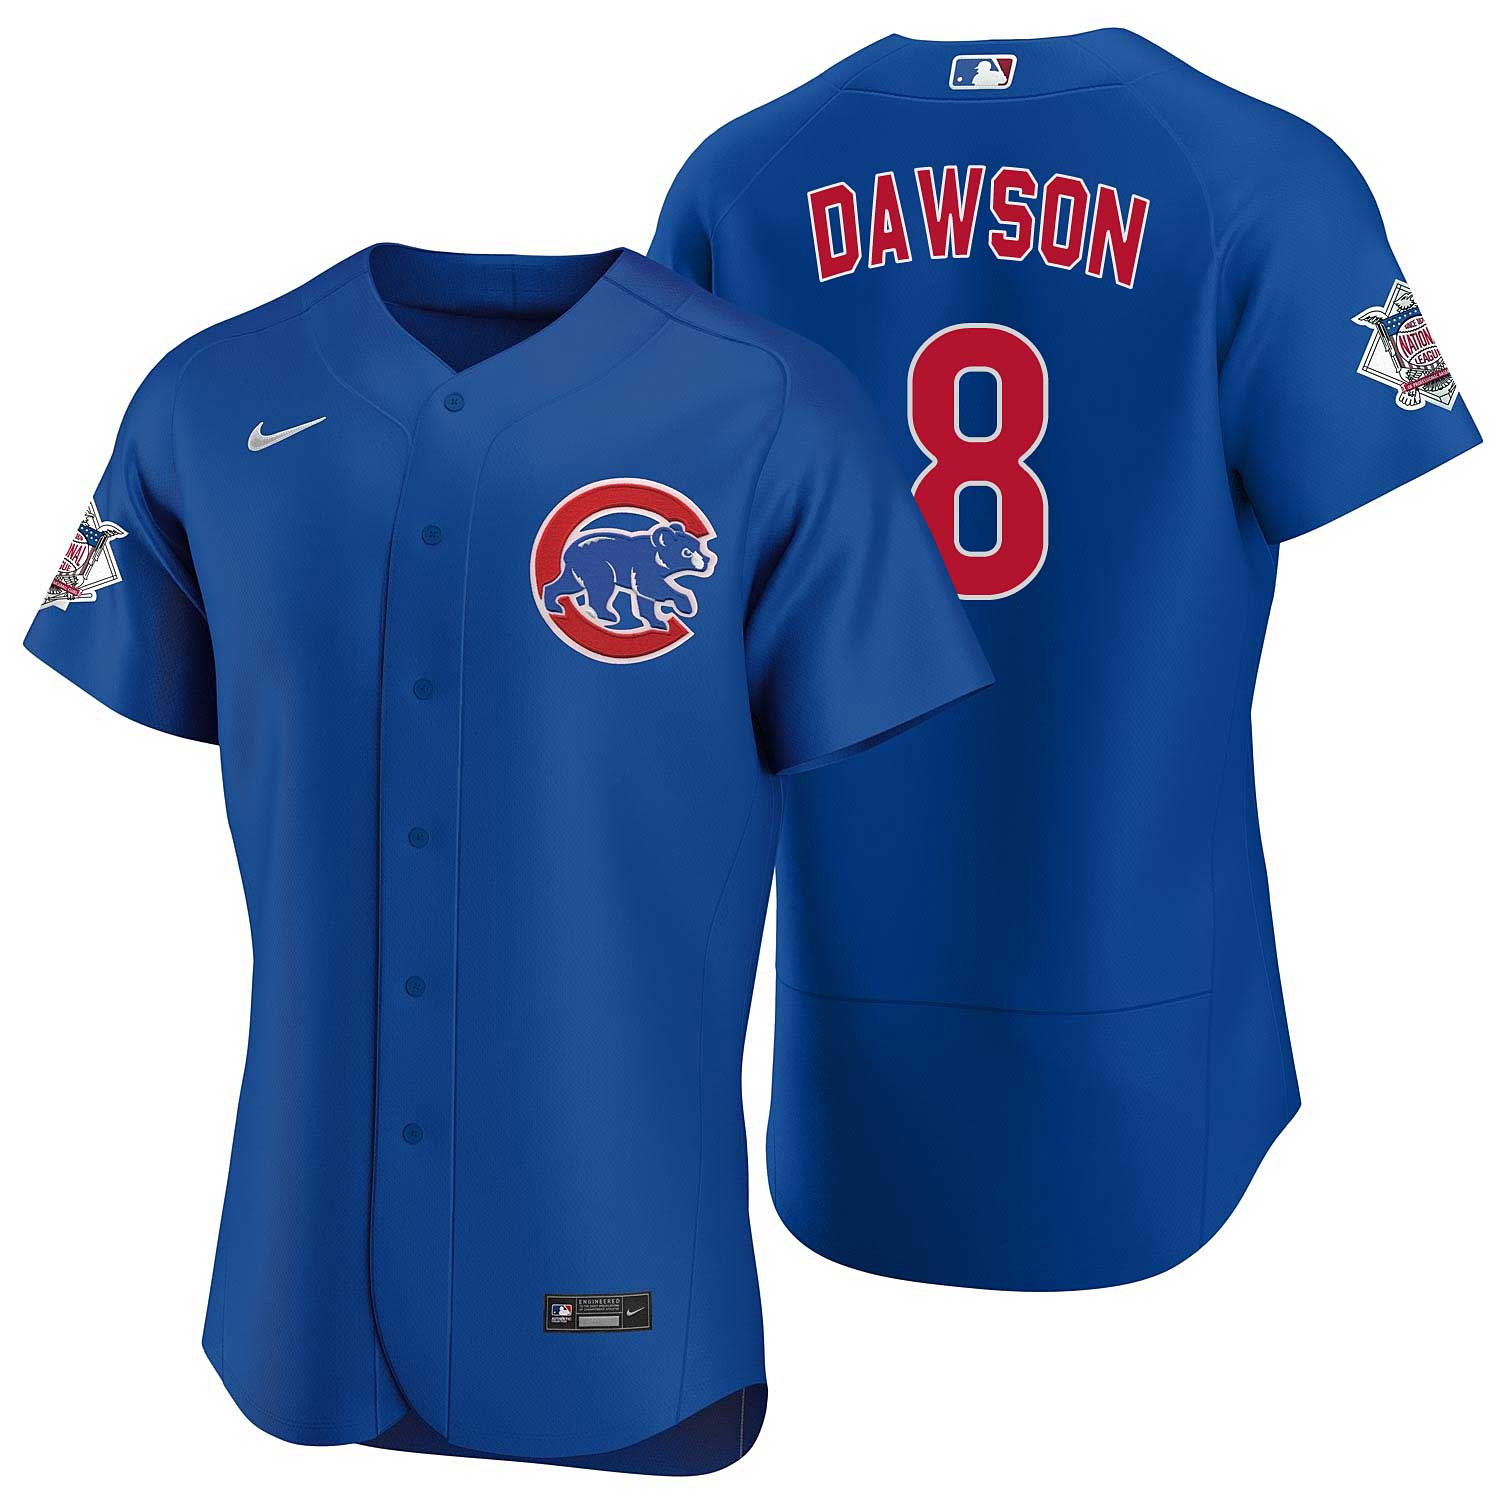 Chicago Cubs Andre Dawson Nike Road Authentic Jersey 44 = Medium / Large